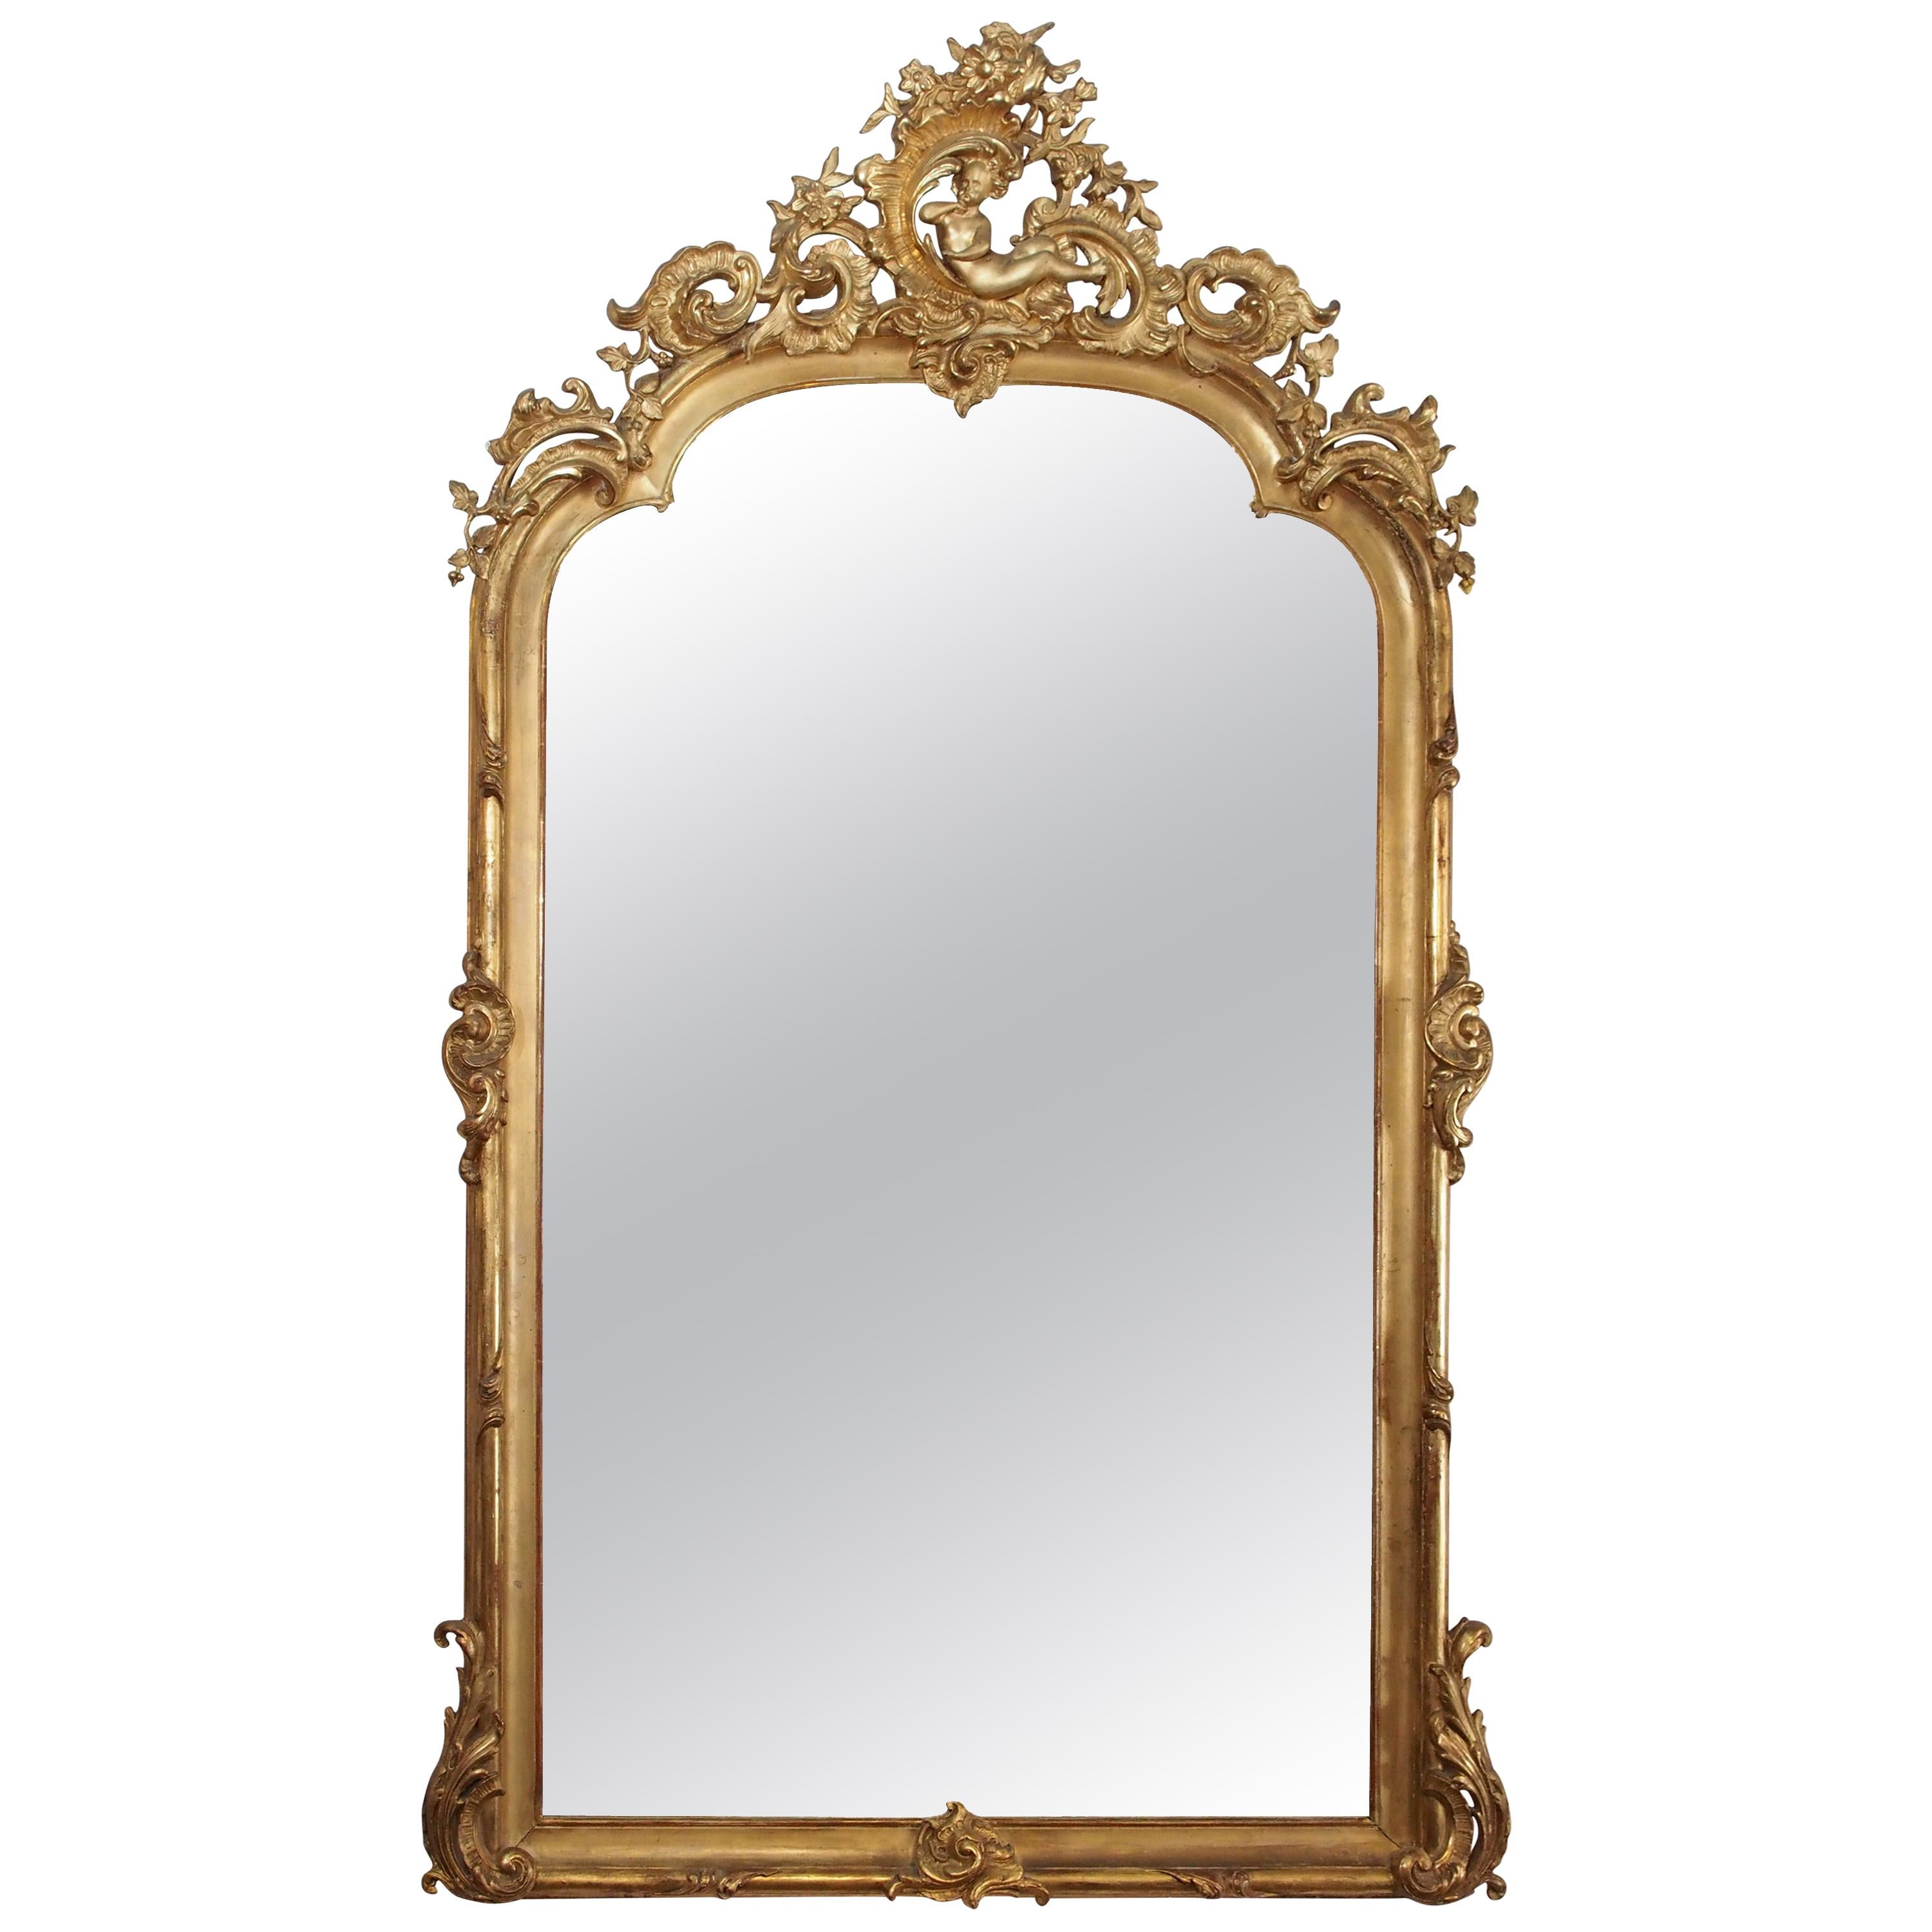 Finest Quality Antique French Gold Leaf Mirror with Beveled Glass, Cherub